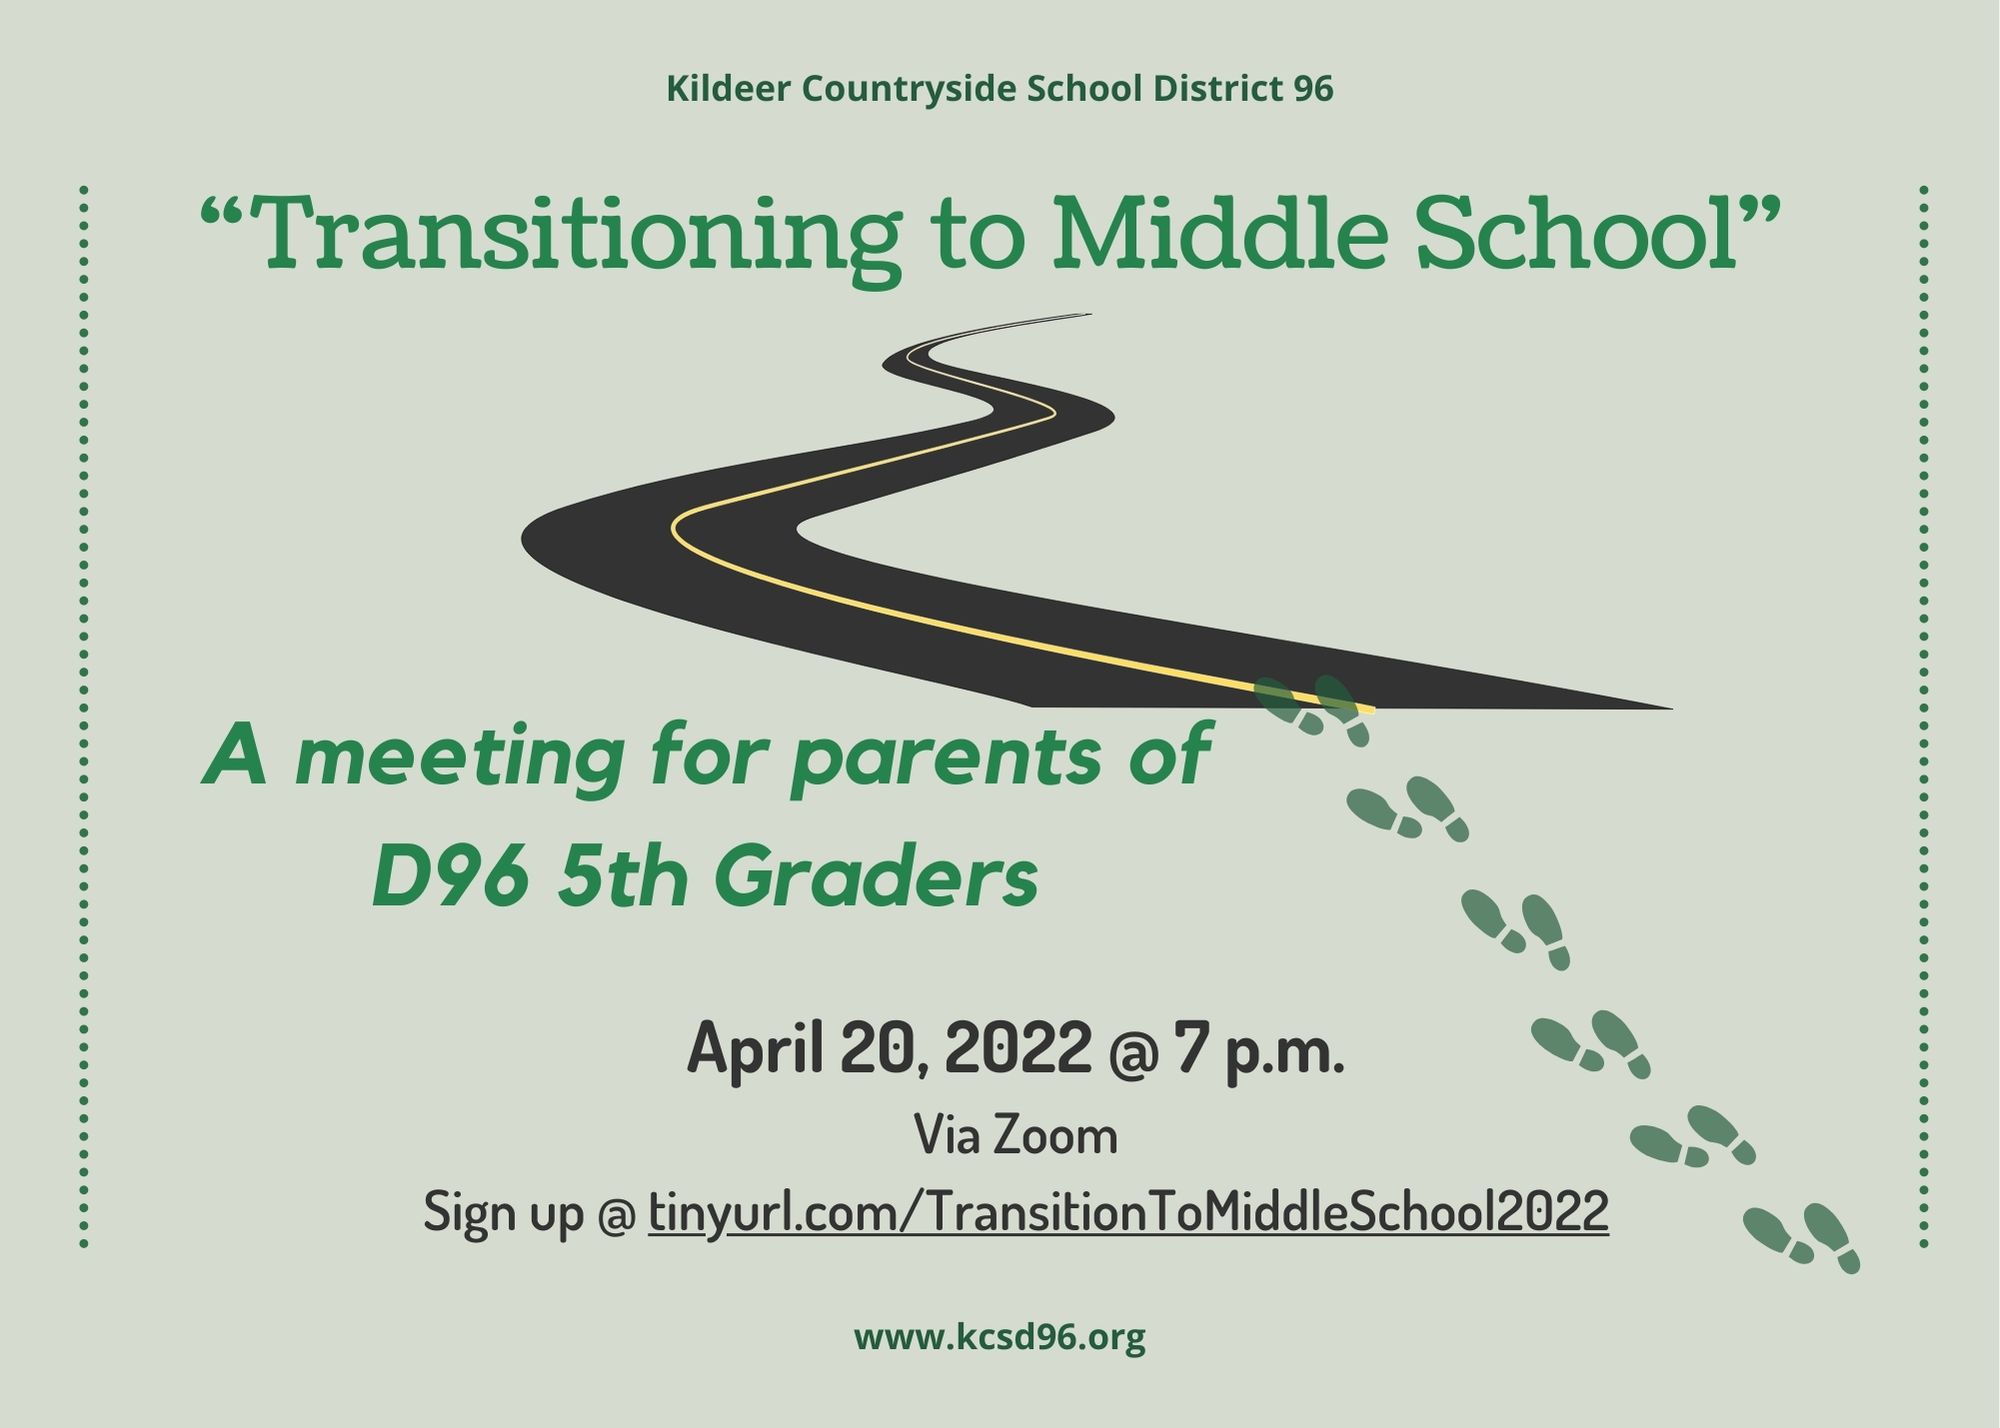 Transitioning to Middle School: April 20, 2022 (Zoom program)